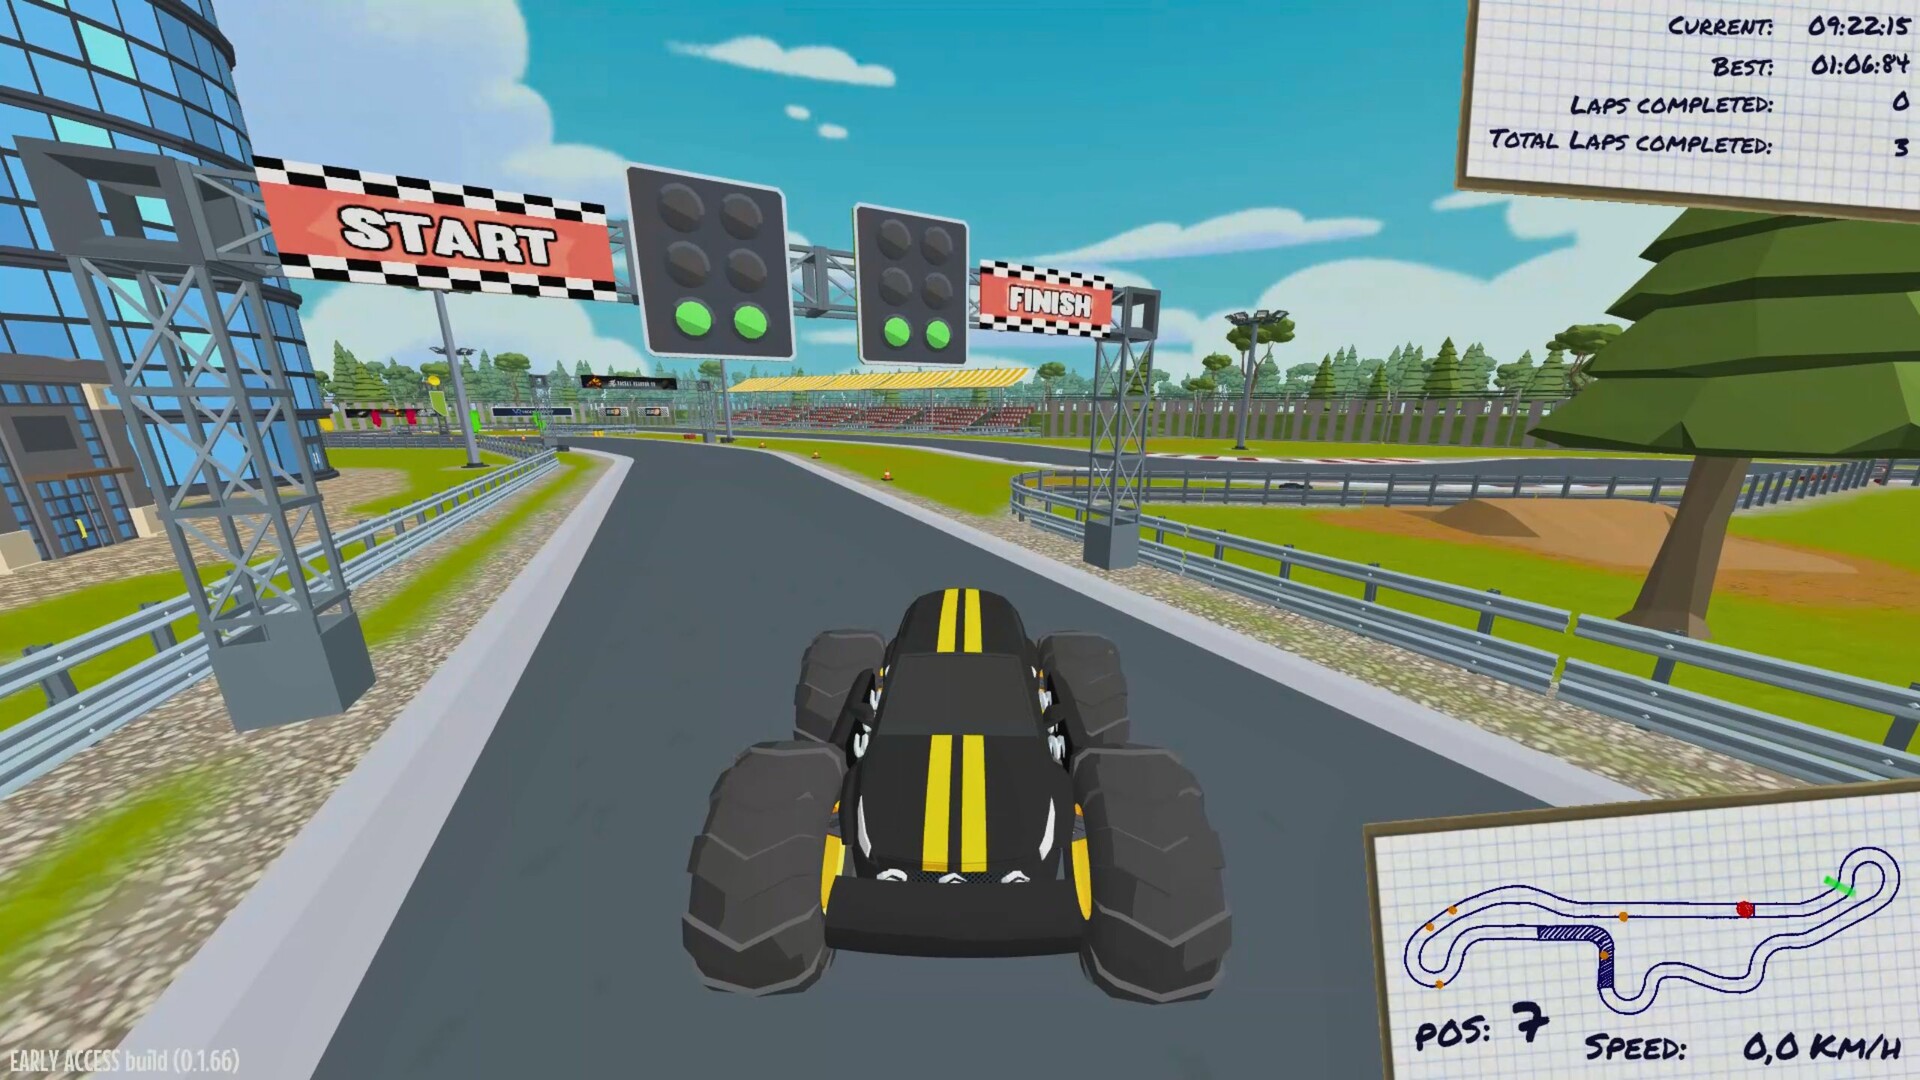 How to build a racing game